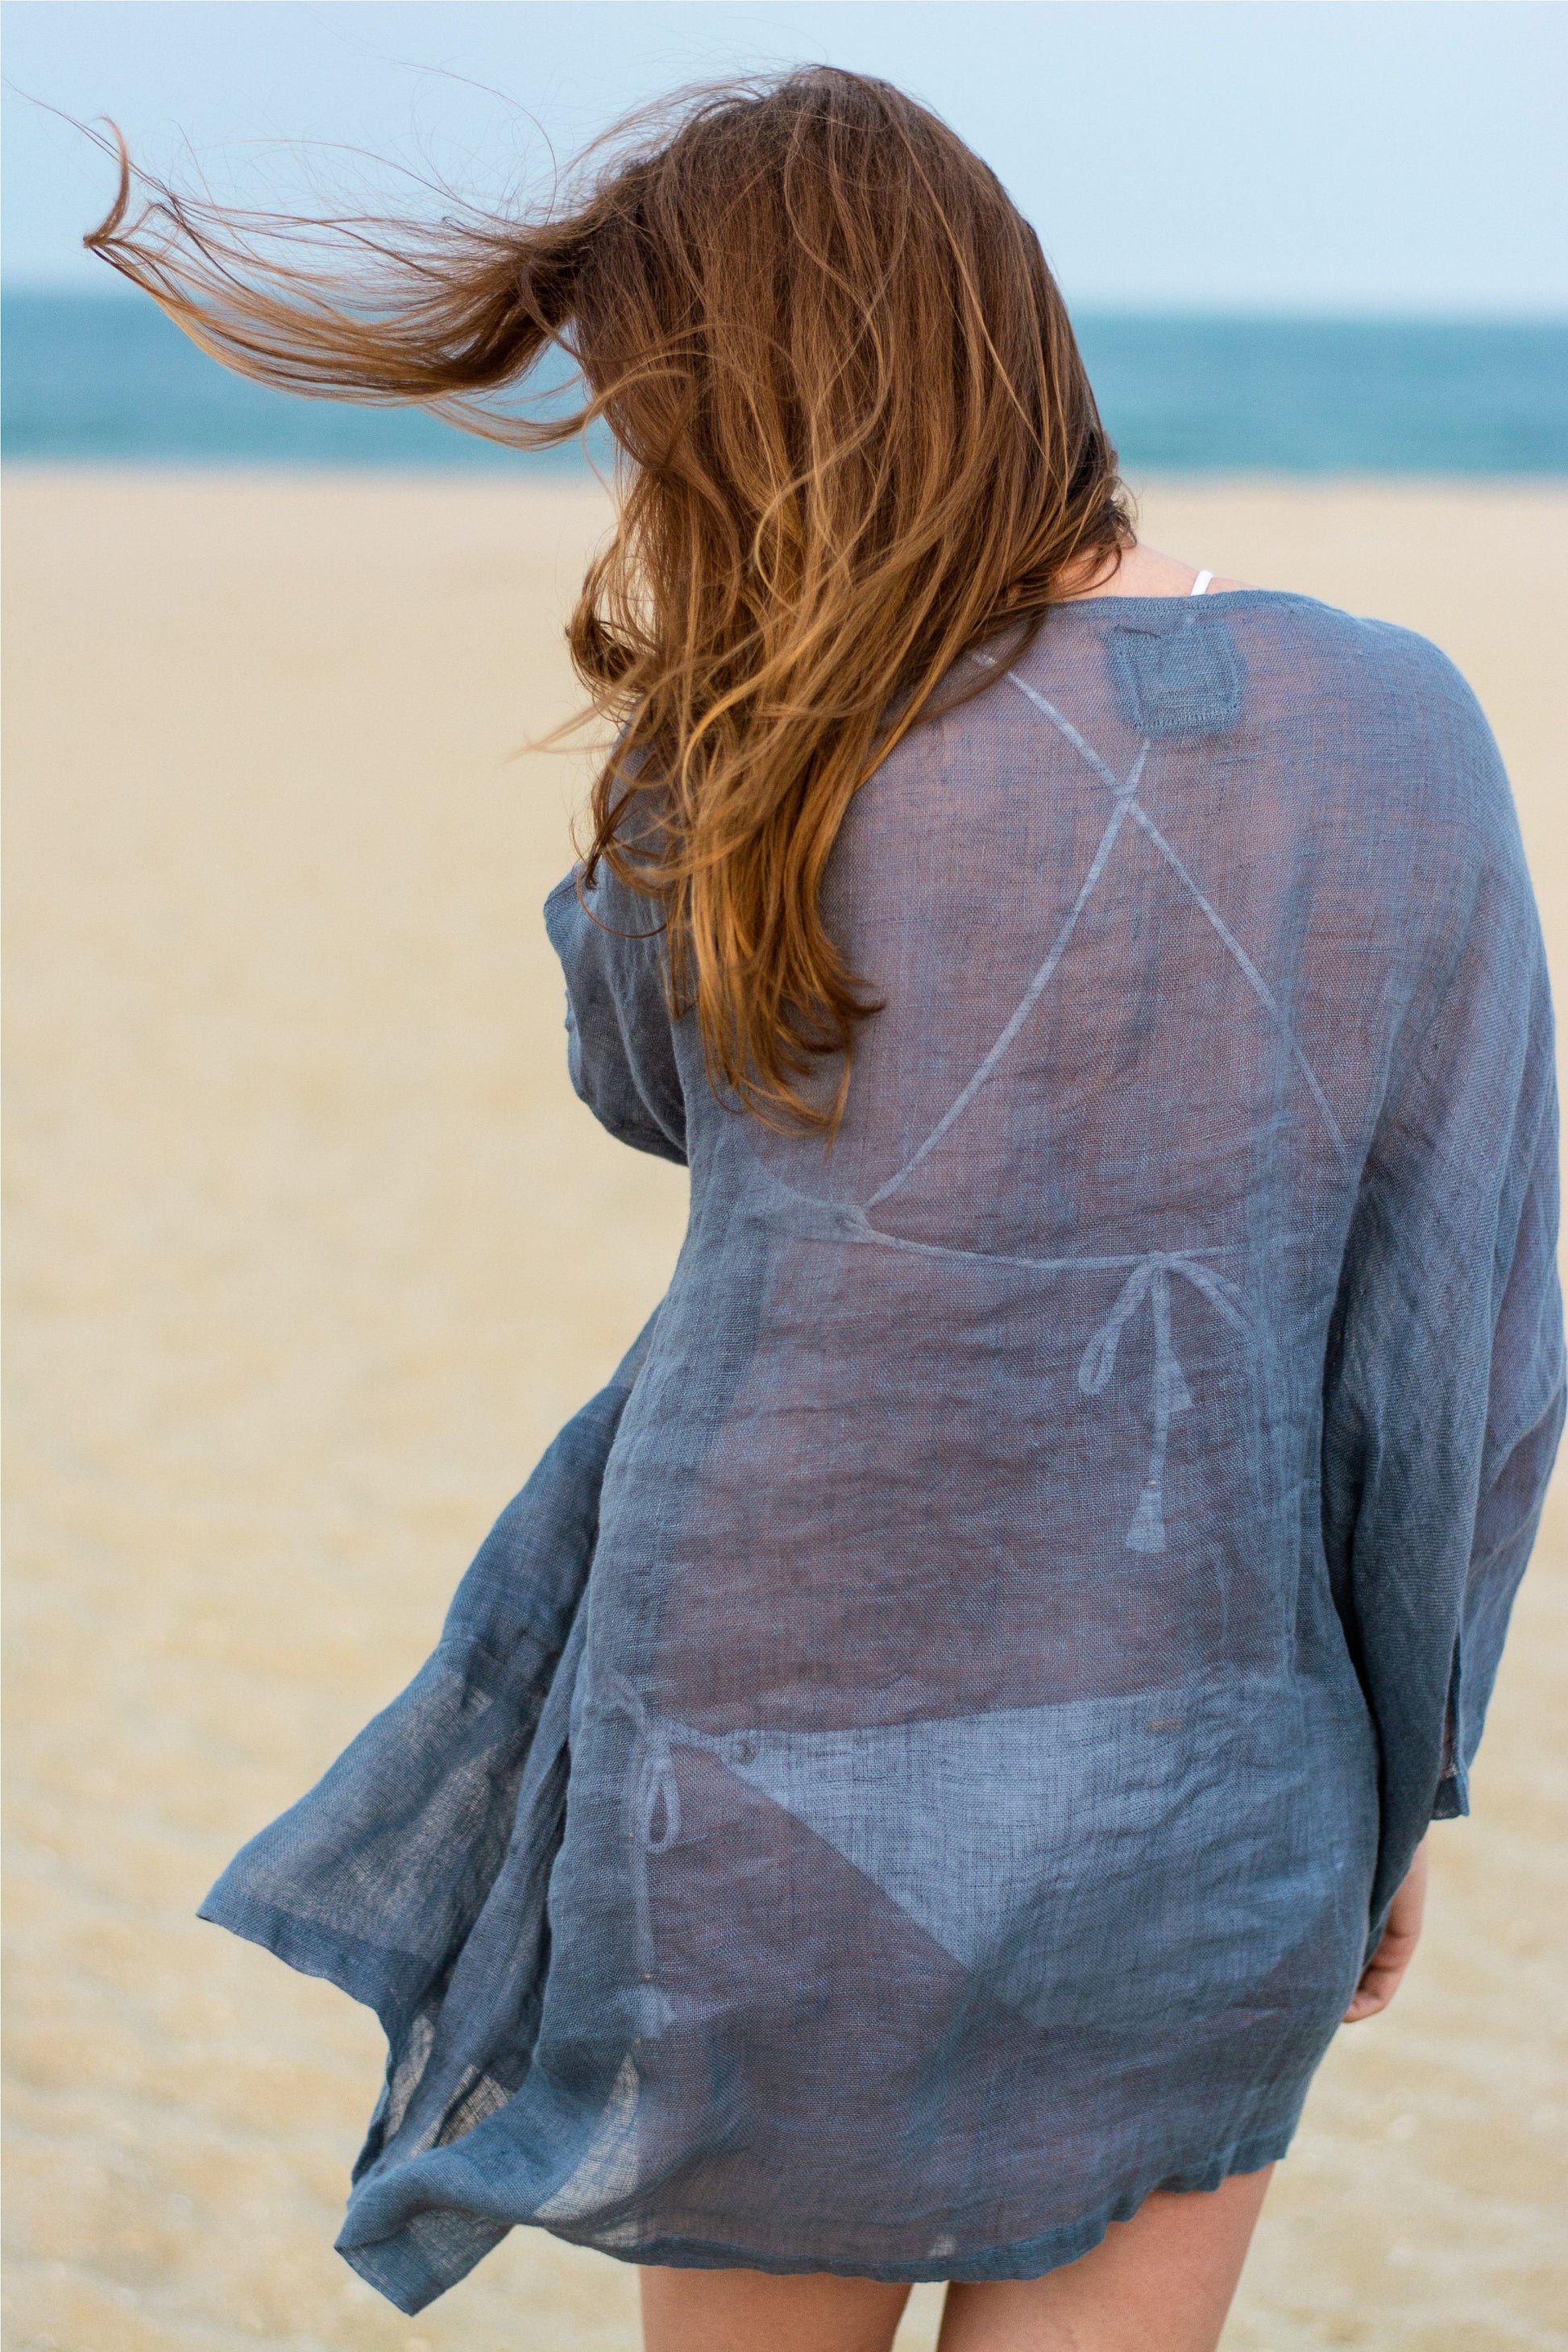 Close-up: The sheer texture of a 100% European washed linen tunic.